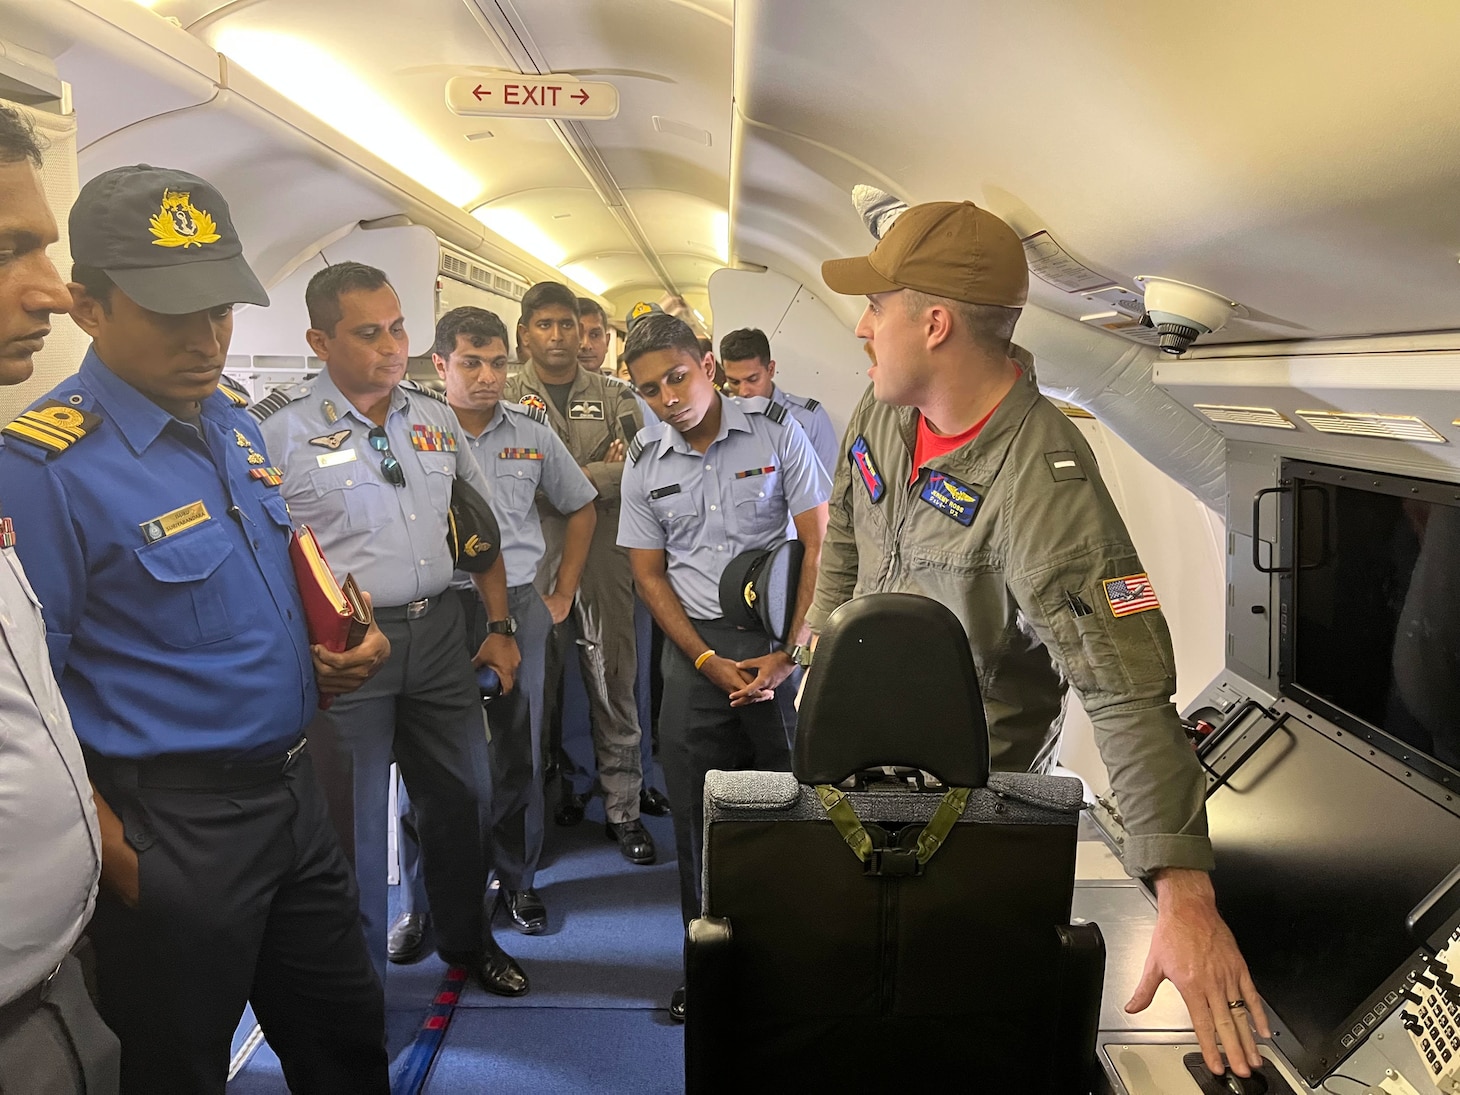 (230120-N-FY142-0006) COLOMBO, Sri Lanka (Jan. 20, 2023) – Lt. j.g. Jeremy Ross, assigned to the “Red Lancers” of Patrol Squadron (VP) 10, gives a tour of a P-8A Poseidon to members of the Sri Lanka Air Force and Navy during exercise Cooperation Afloat Readiness and Training/Marine Exercise Sri Lanka 2022. VP-10 is currently operating from Kadena Air Base in Okinawa, Japan. The squadron conducts maritime patrol and reconnaissance, as well as theater outreach operations, as part of a rotational deployment to the U.S. 7th Fleet area of operations. (U.S. Navy photo by Lt. j.g. Brian DePaola)